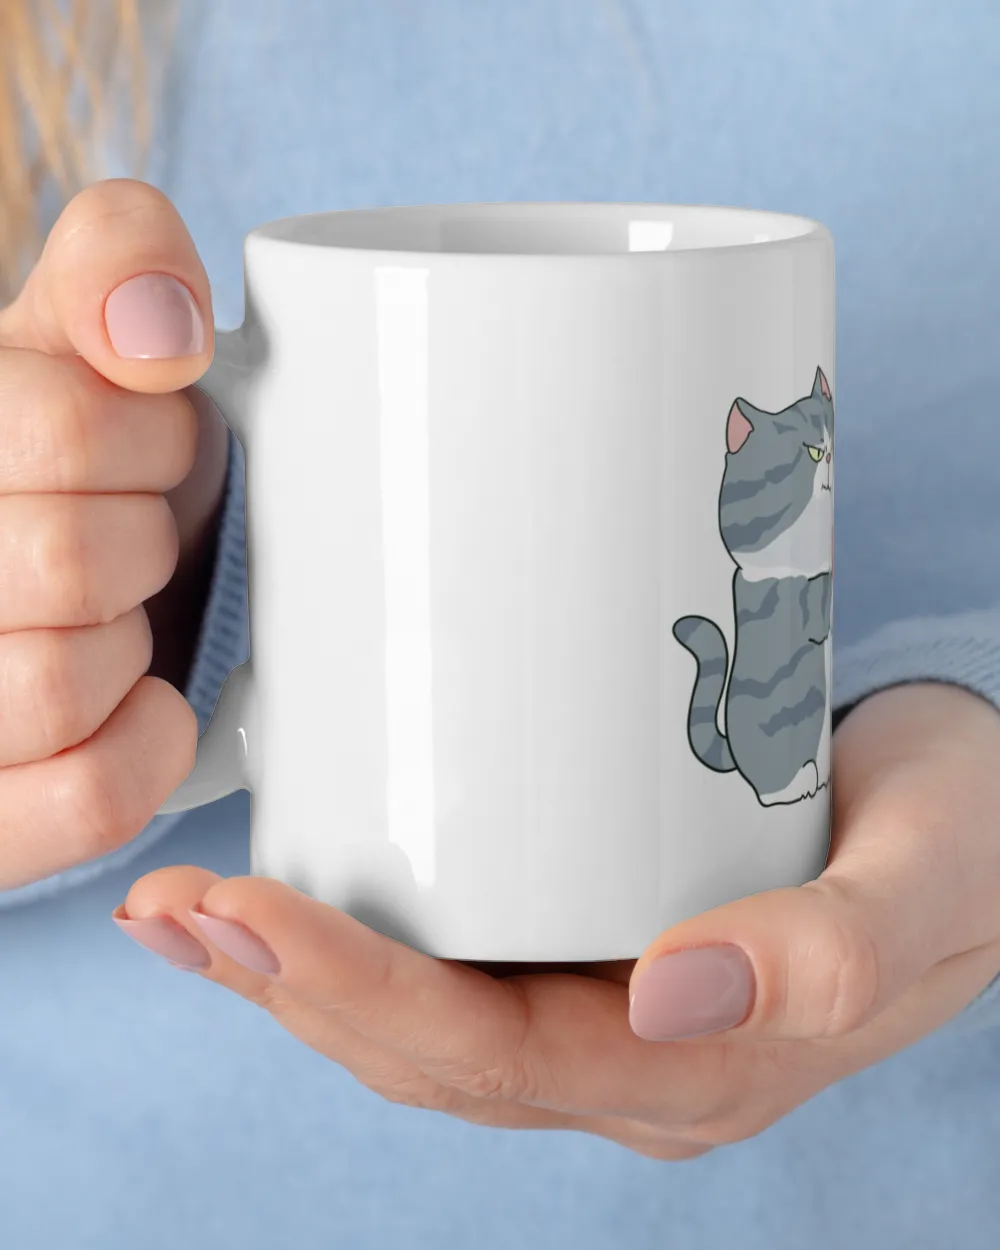 Glass of water for fun for pet lovers, Dogs attract cat magnets | Mug Maxui